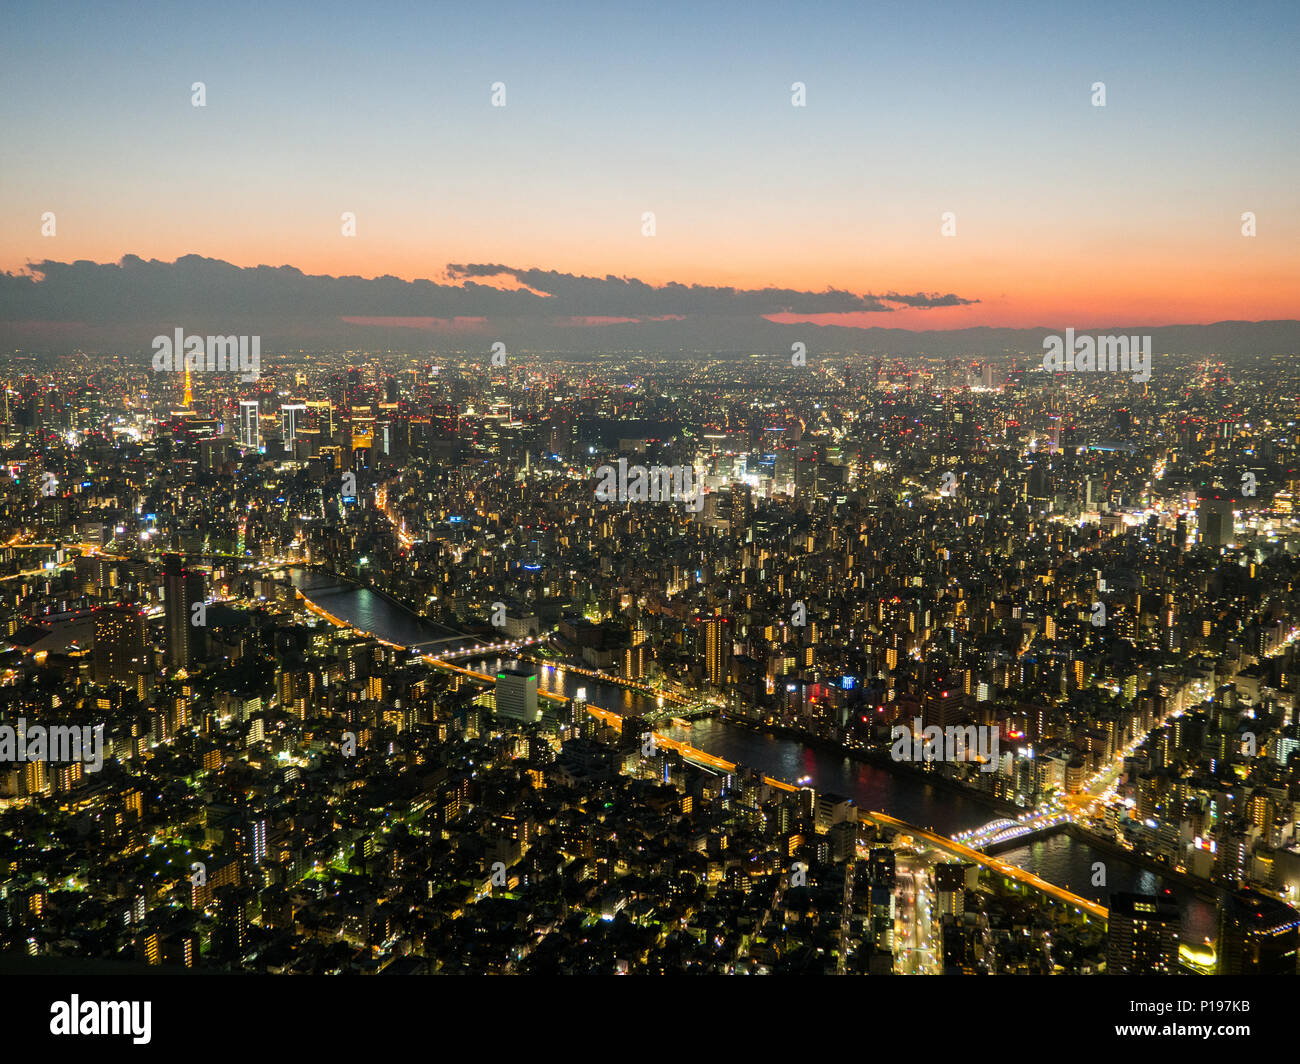 Tokyo Japan Aerial Cityscape View of Tokyo Tower At Dusk Sunset Stock Photo